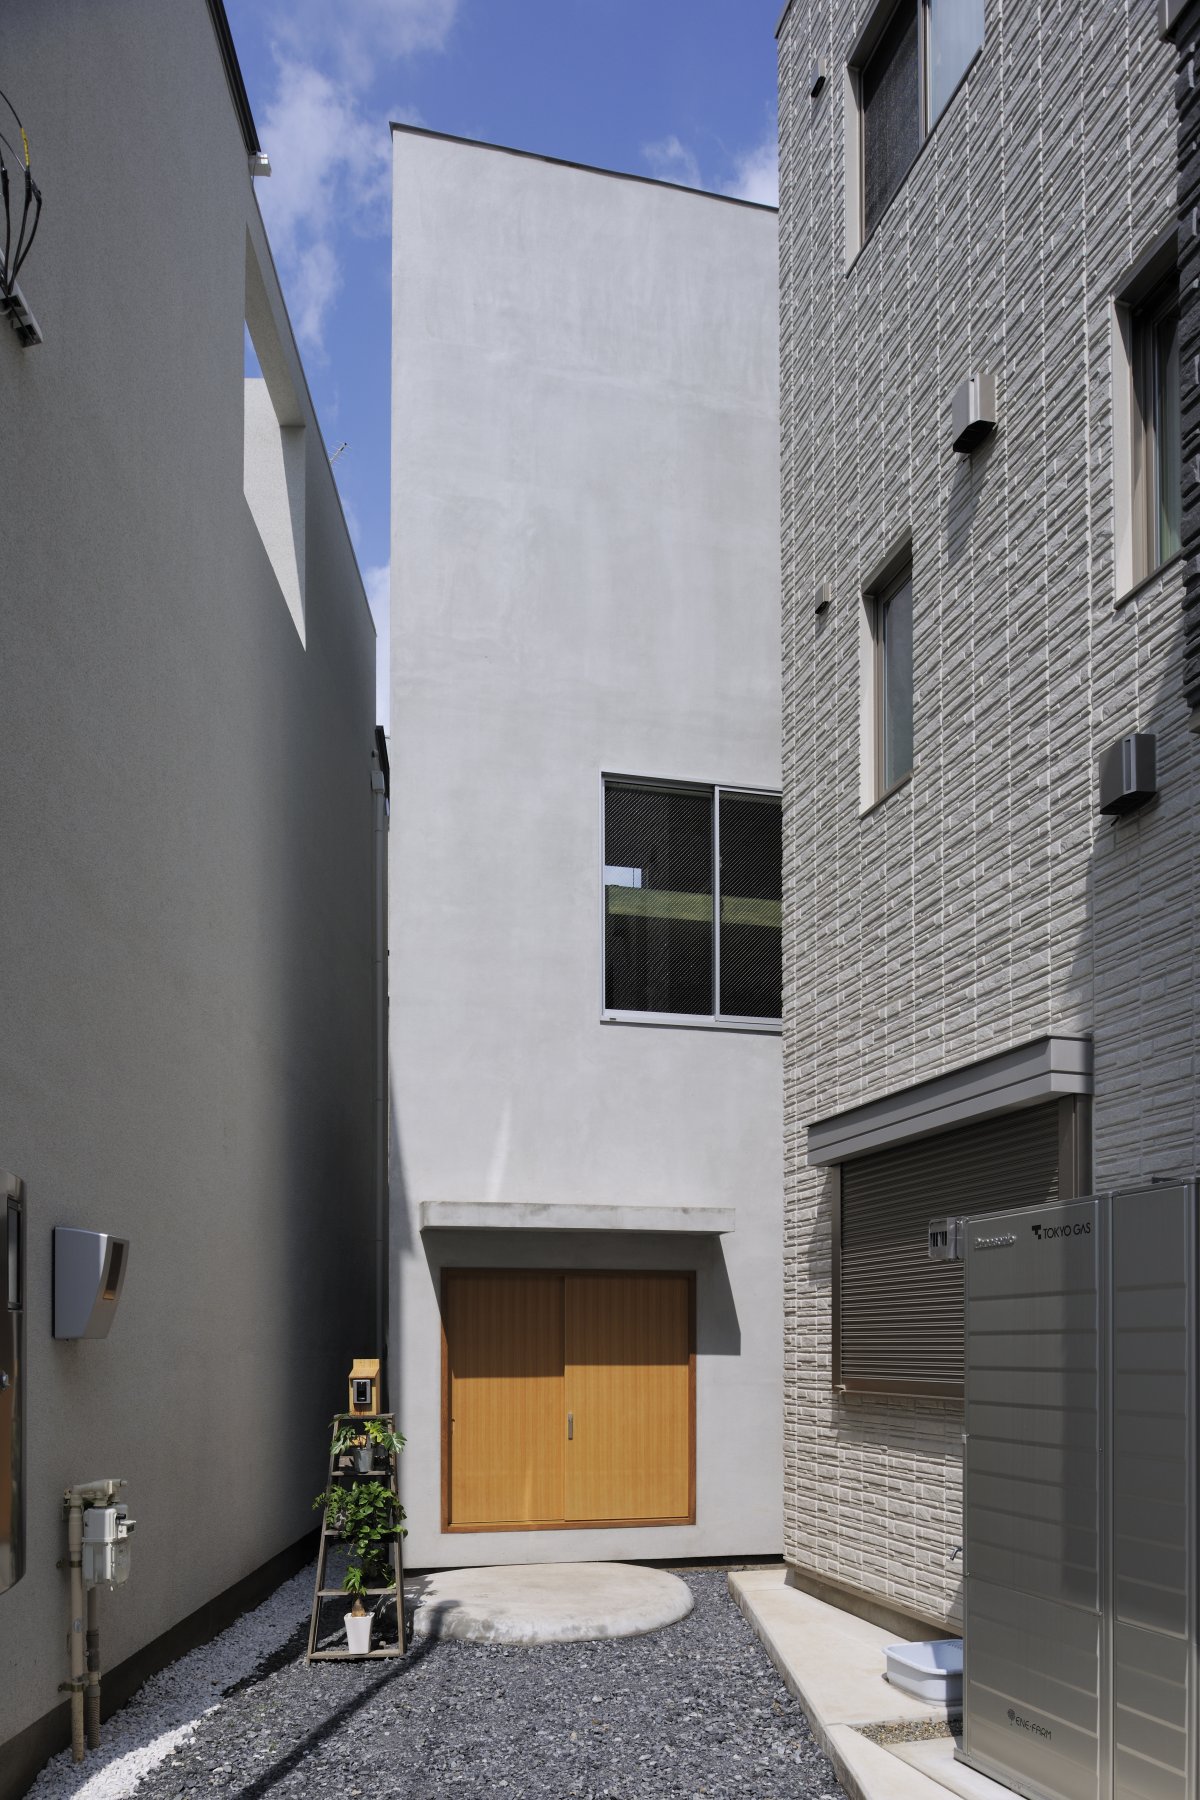 House T is tucked between two other townhomes in Tokyo. On the outside, it looks like a normal home.